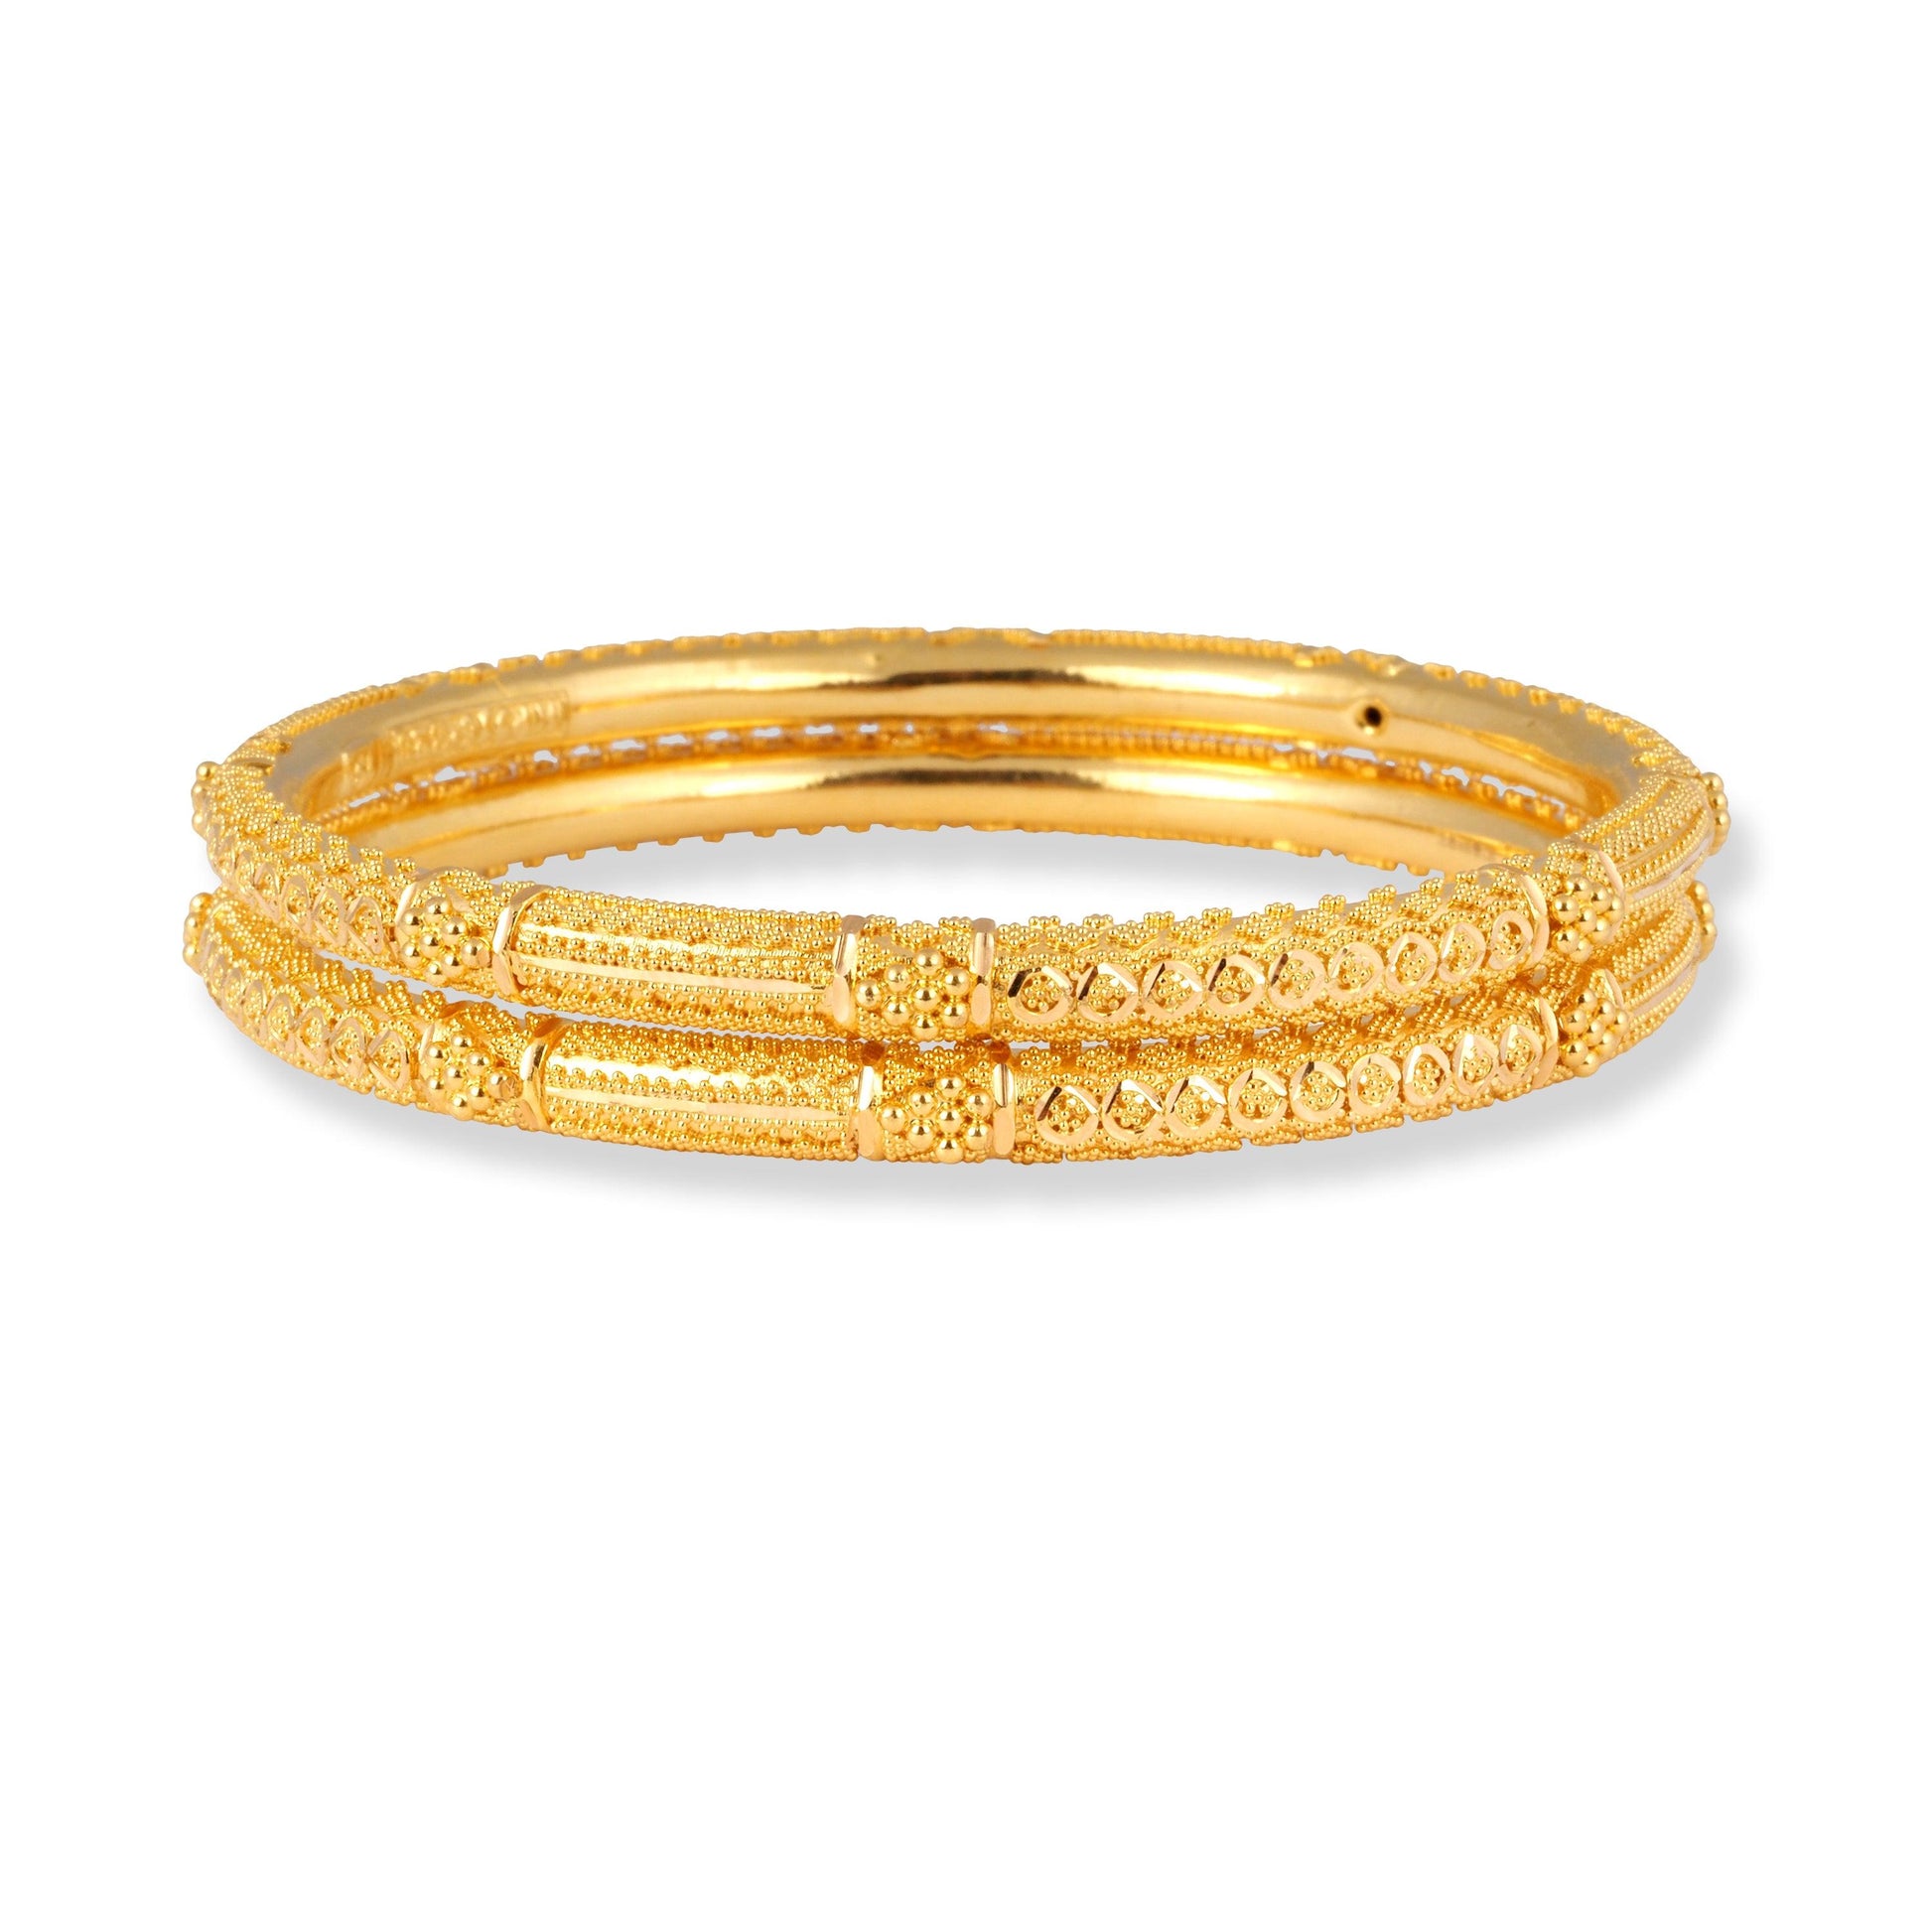 22ct Gold Pair of Hollow Tube Bangles with Filigree Work & Comfort fit Finish B-8586 - Minar Jewellers